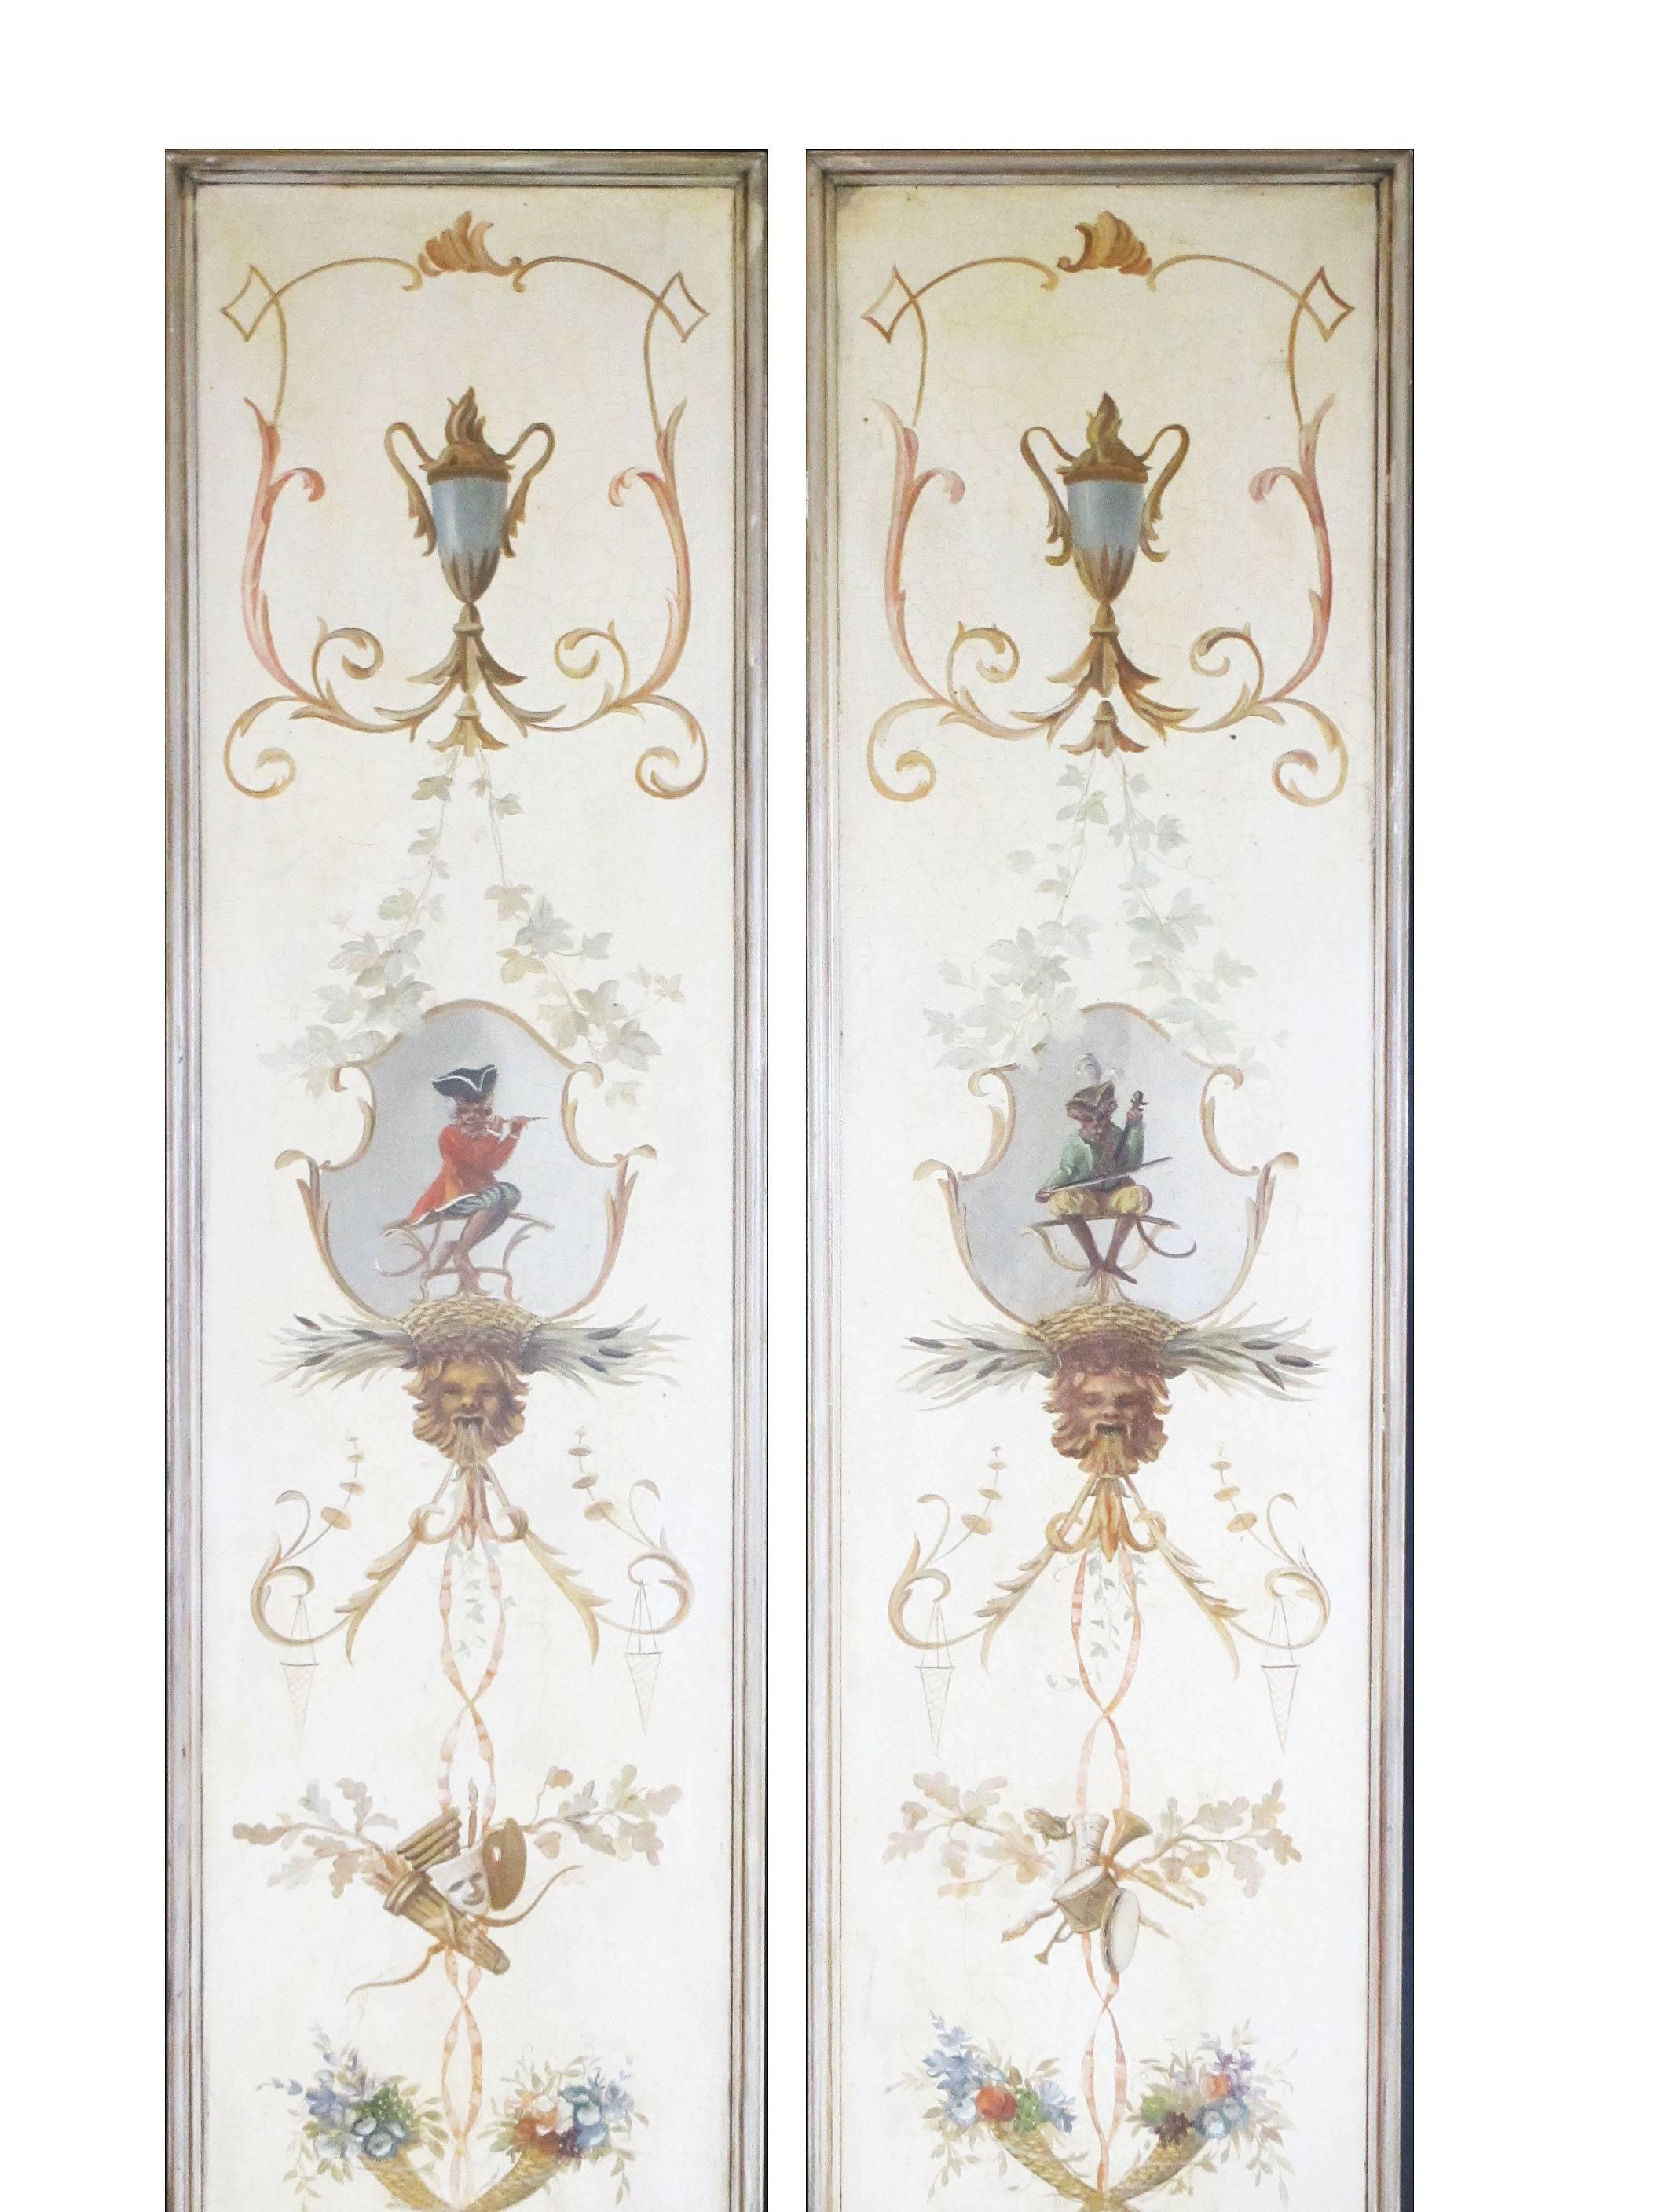 A fine pair of Singerie Sub-Genre Chinoiserie style painted panels, after the antique designs by Jean Baptiste Pillement (French, 1728-1808), the elaborately painted wood panels, designed after the Trompe l'oeil panels in the Salon des Singes at The